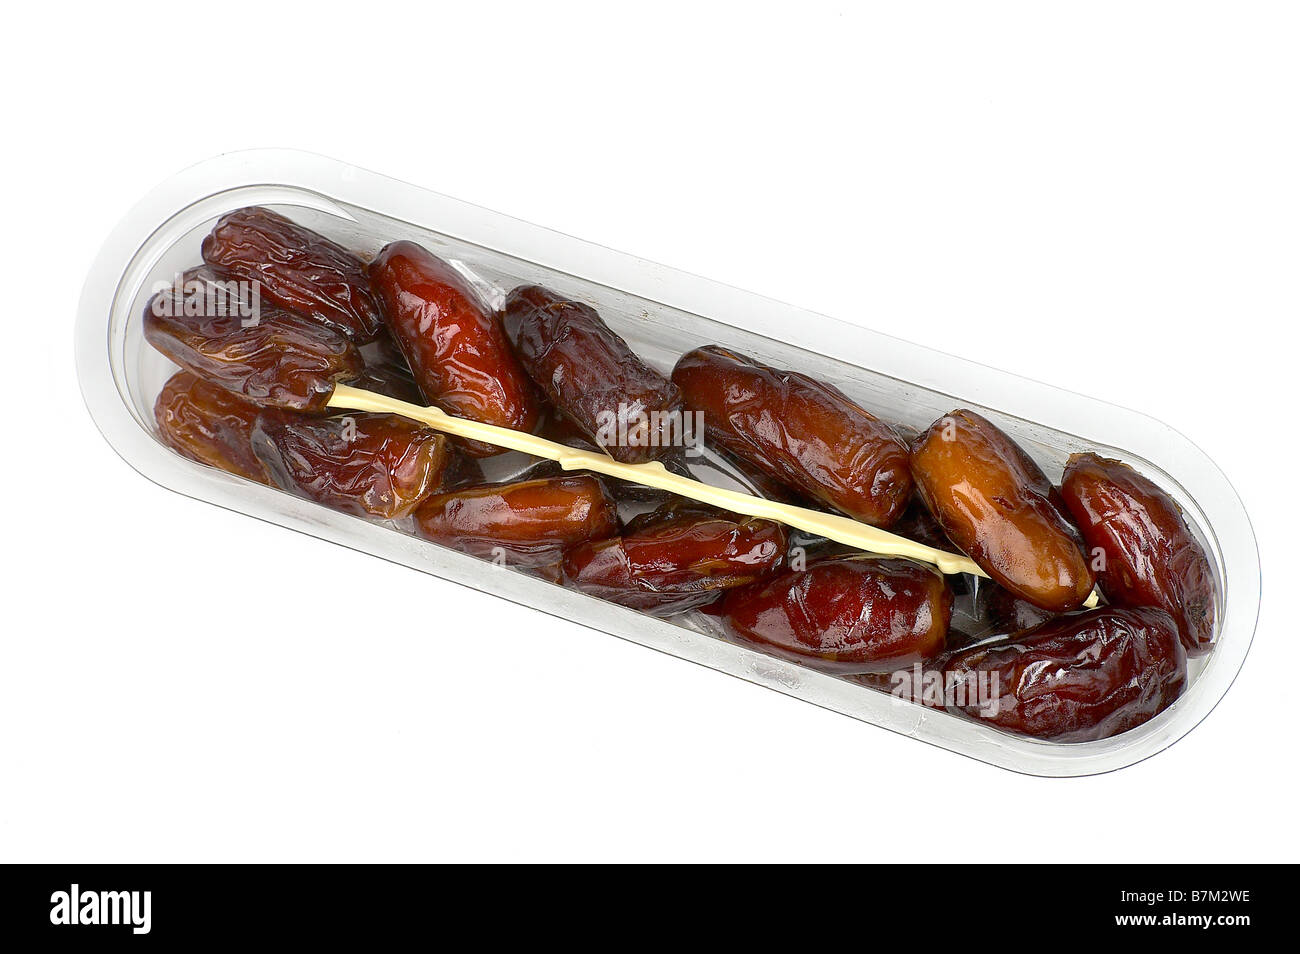 PLASTIC TRAY WITH DATES Stock Photo